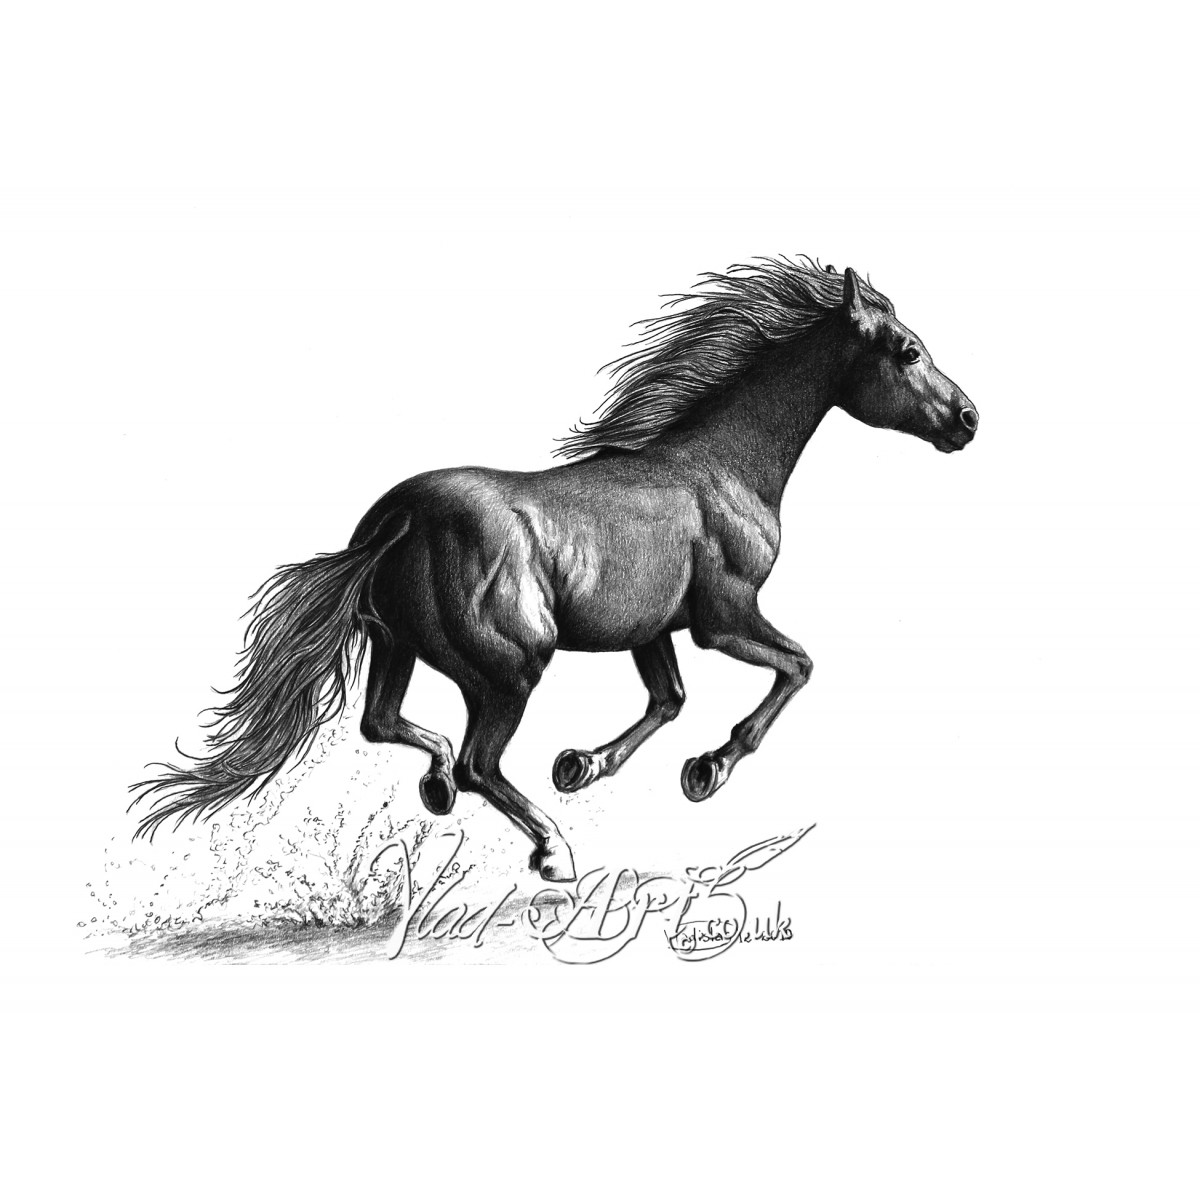 Free Download How To Draw A Mustang Horse Running - hd wallpaper